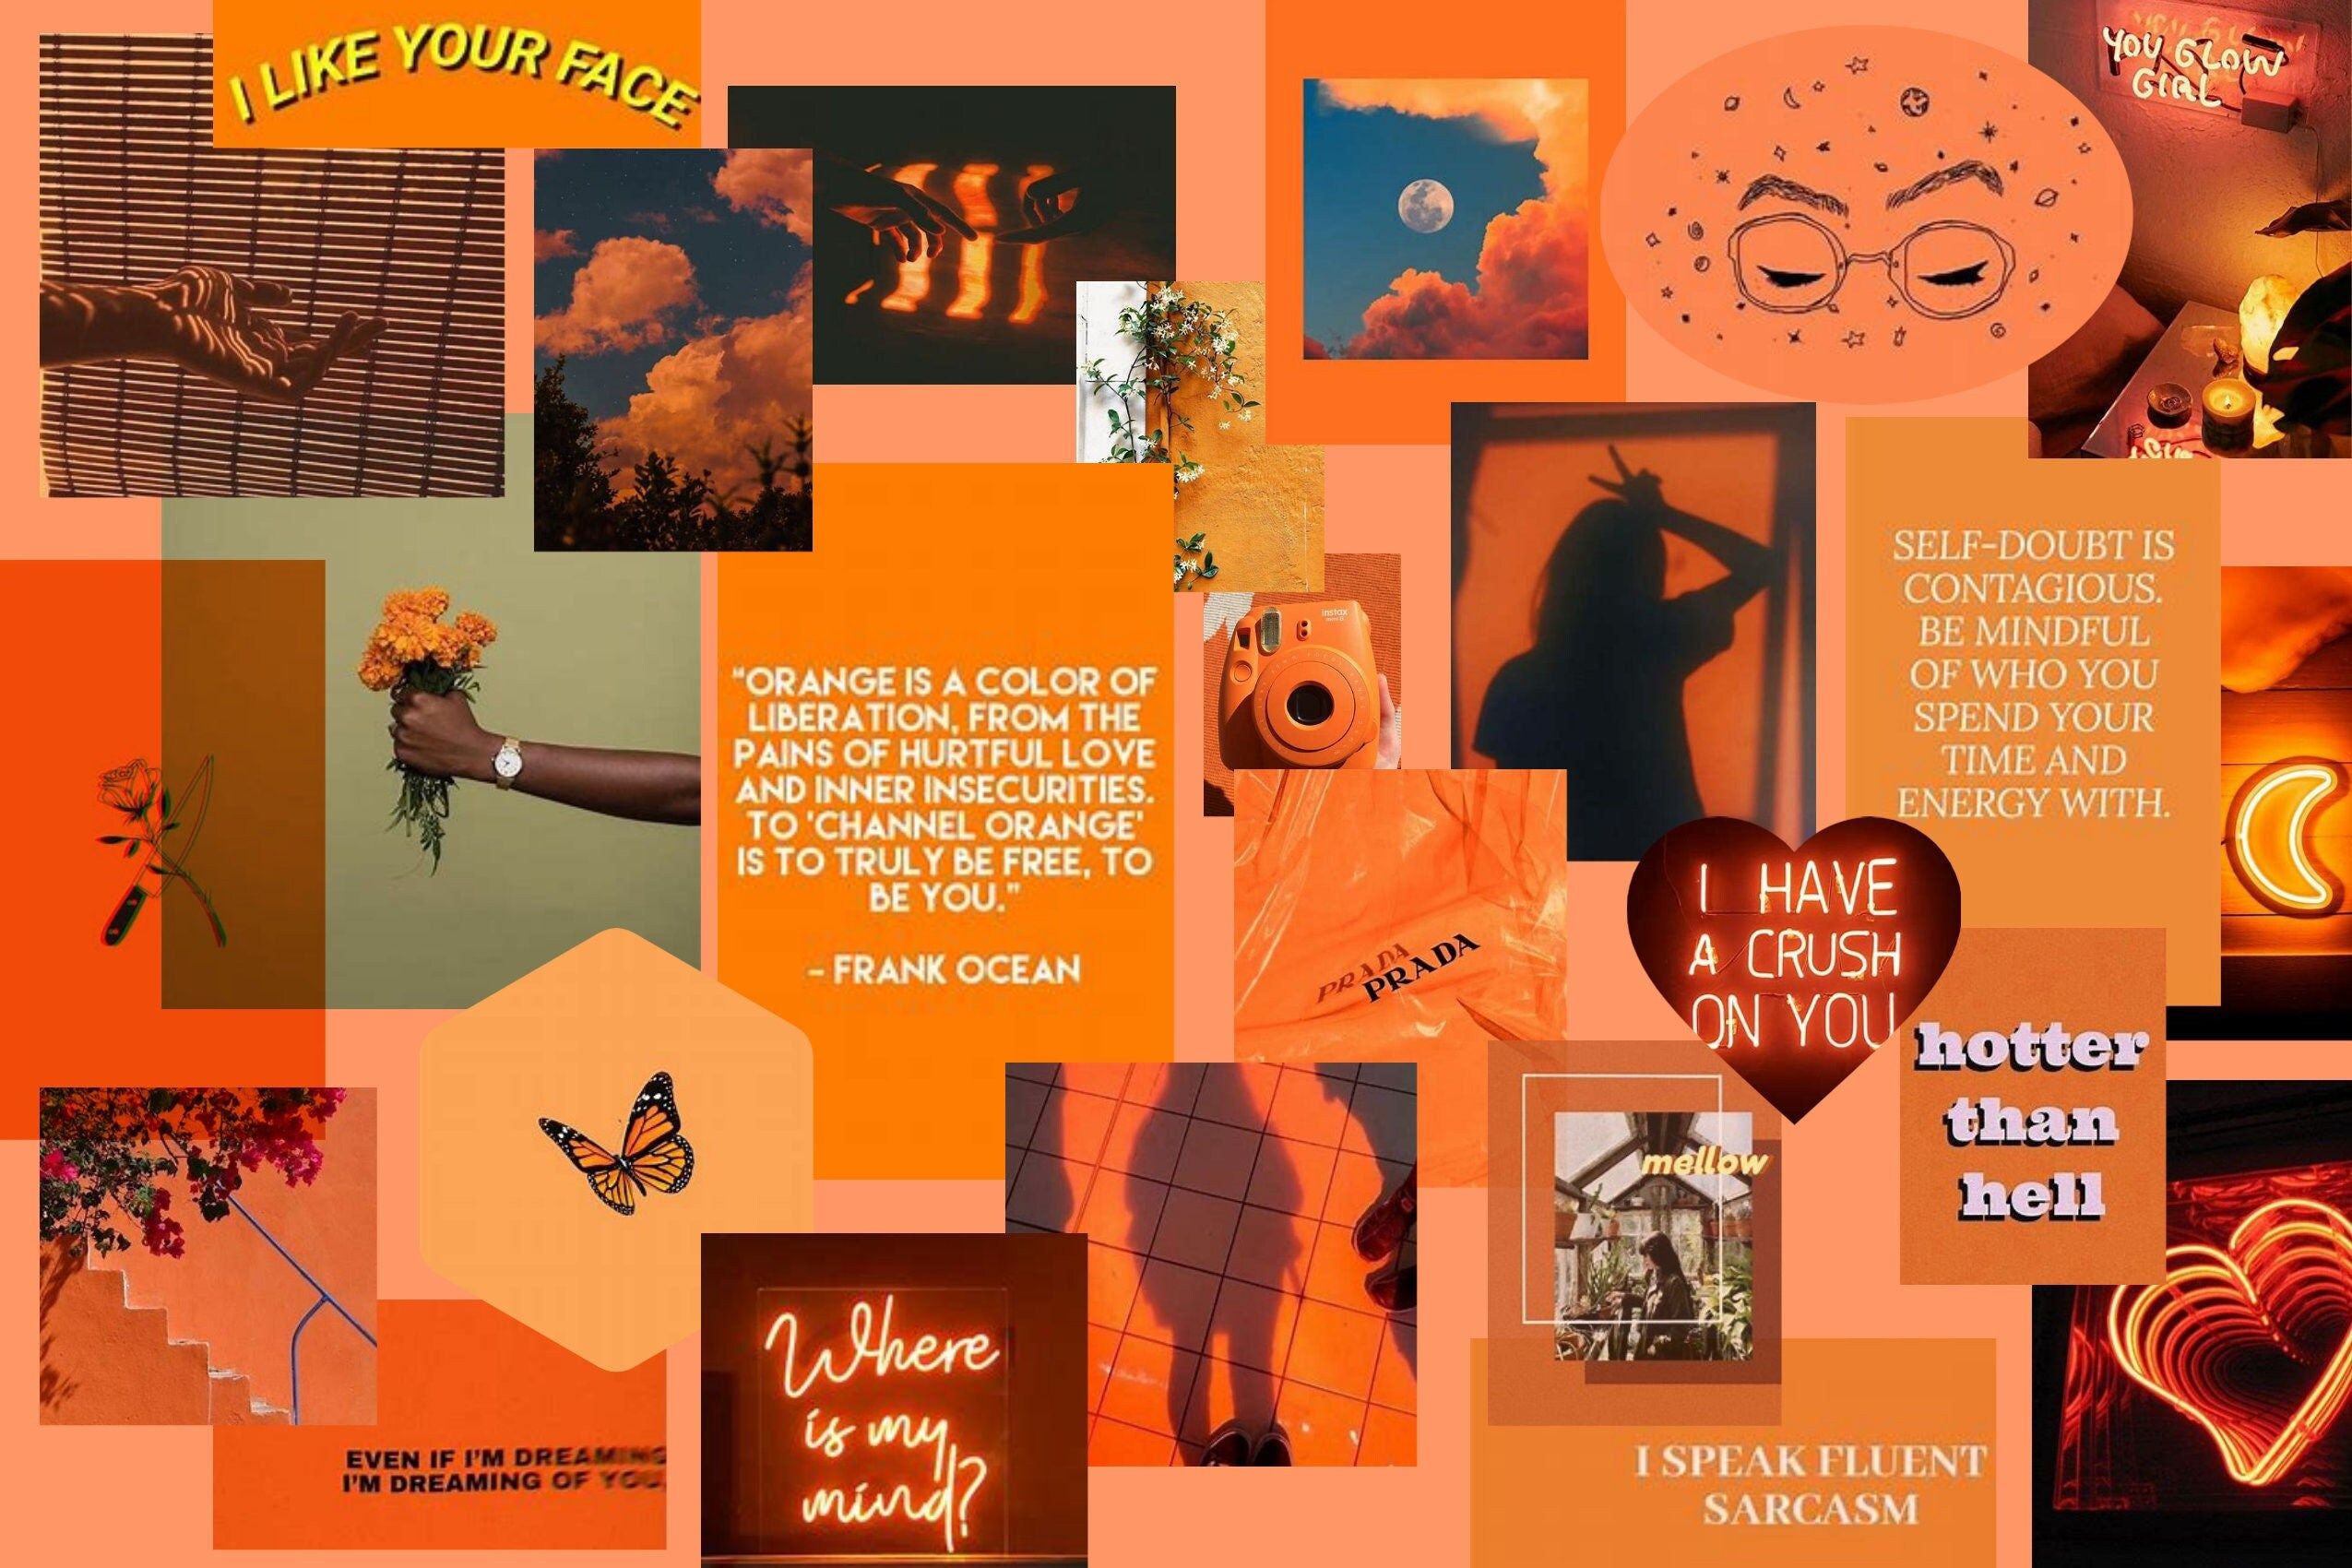 A collage of orange and brown aesthetic images - Orange